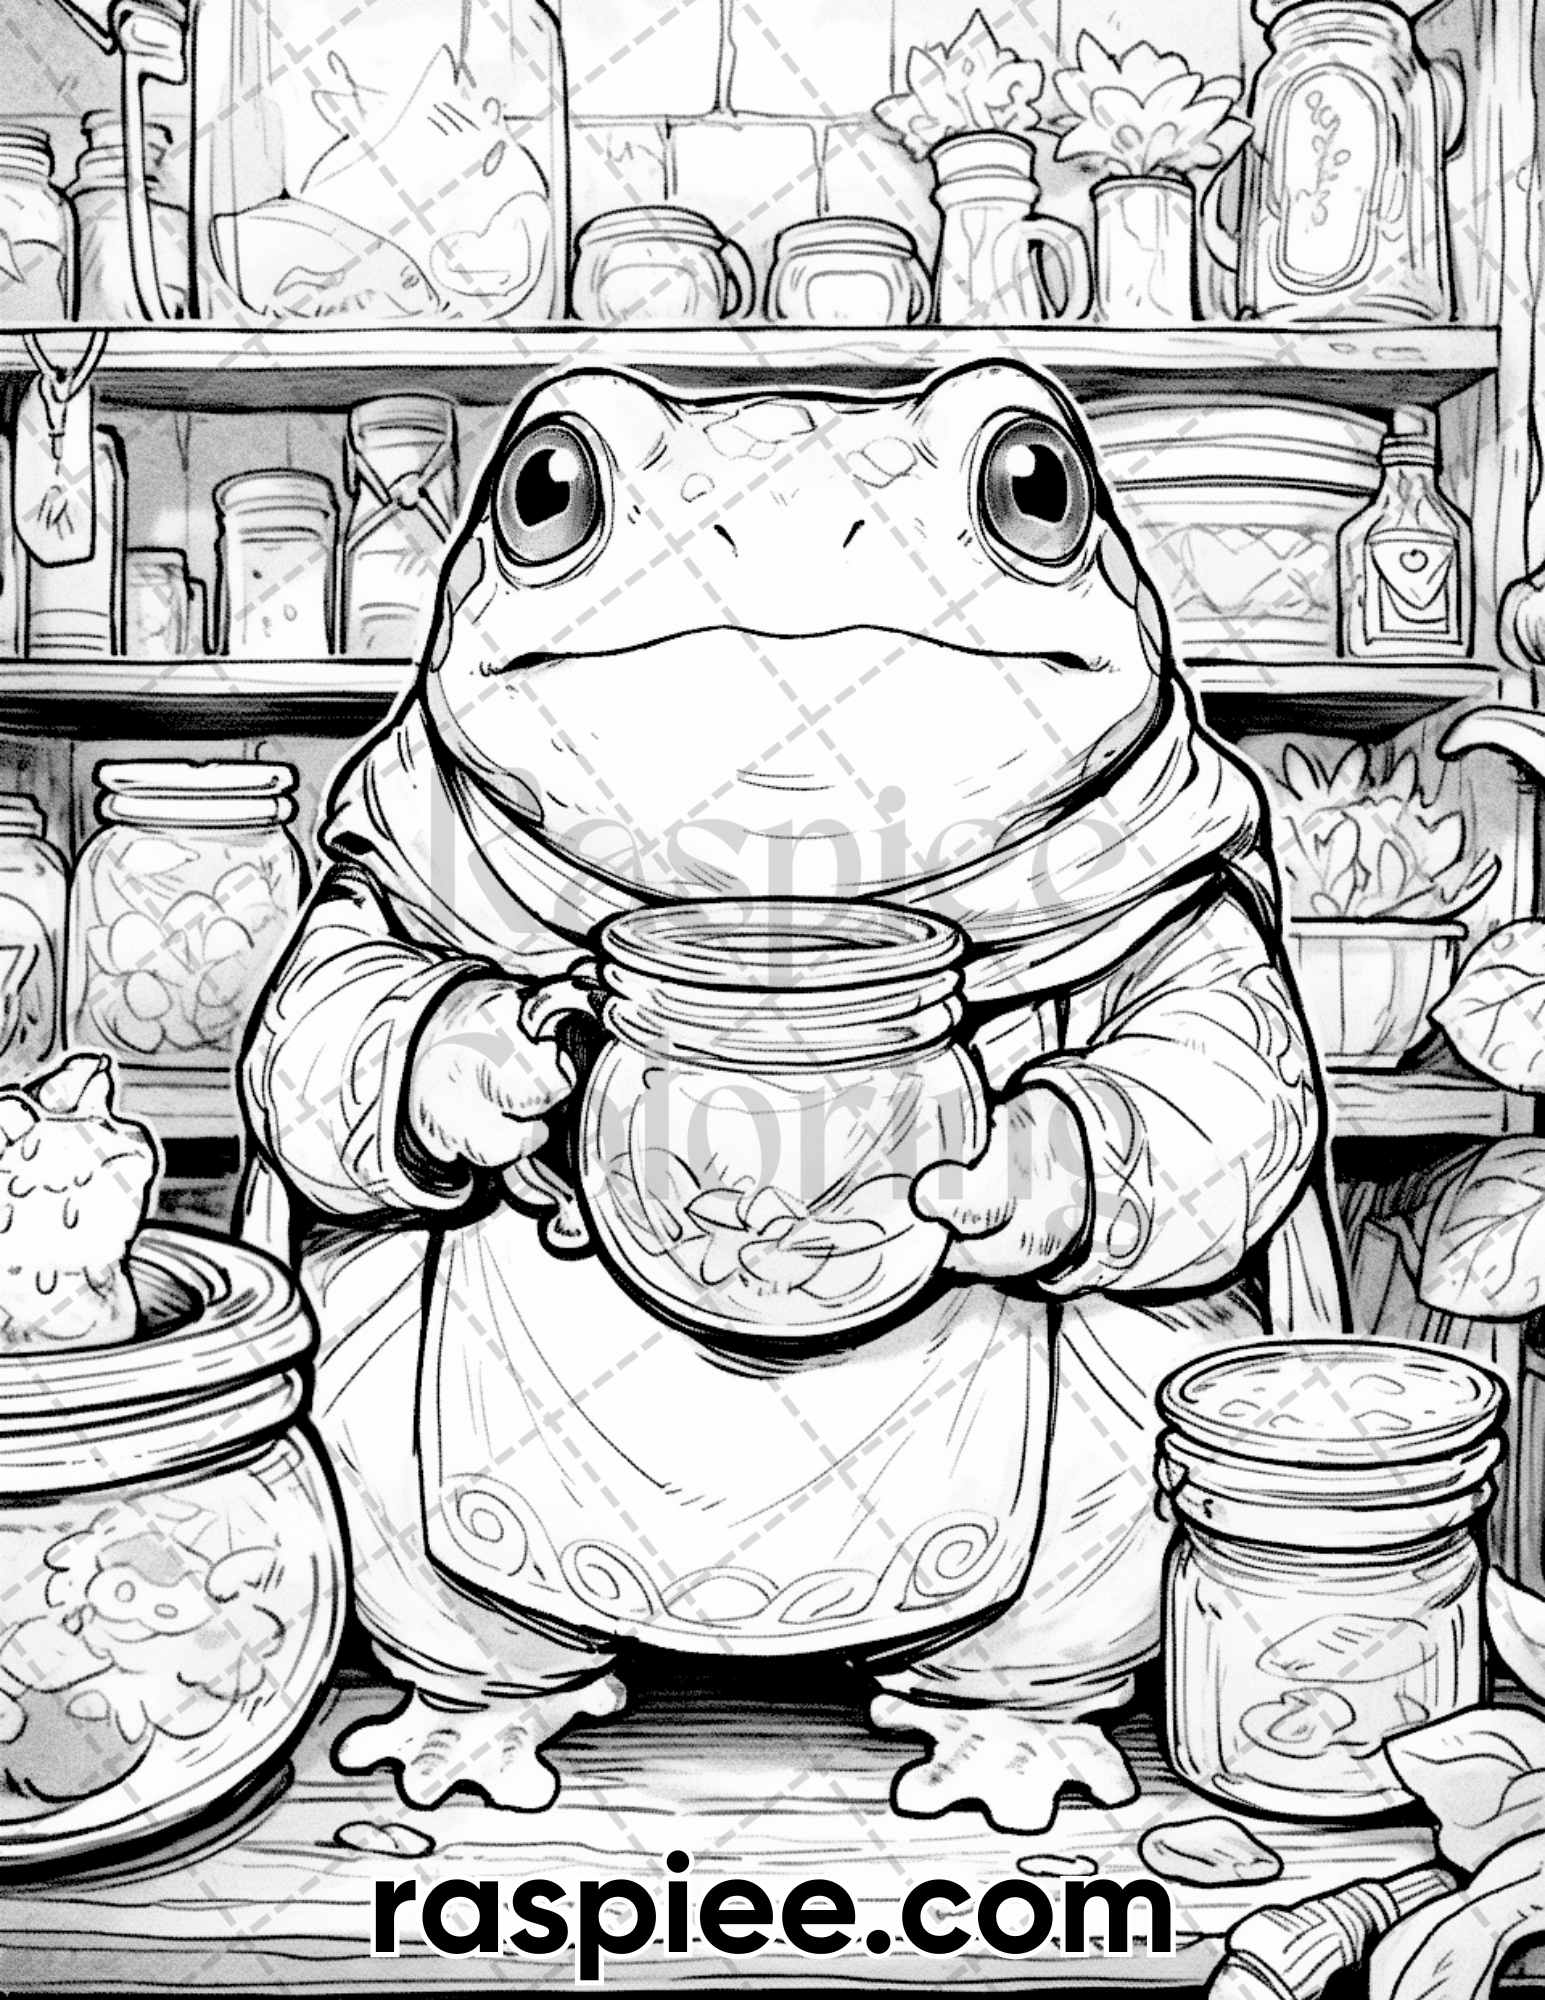 Frog Kingdom Grayscale Coloring Page, Stress Relief Coloring Page, Nature-Inspired Coloring Book, Digital Download Coloring Page, Detailed Frog Coloring Sheet, Animal Coloring Pages, Frog Coloring Pages, Fantasy Coloring Pages